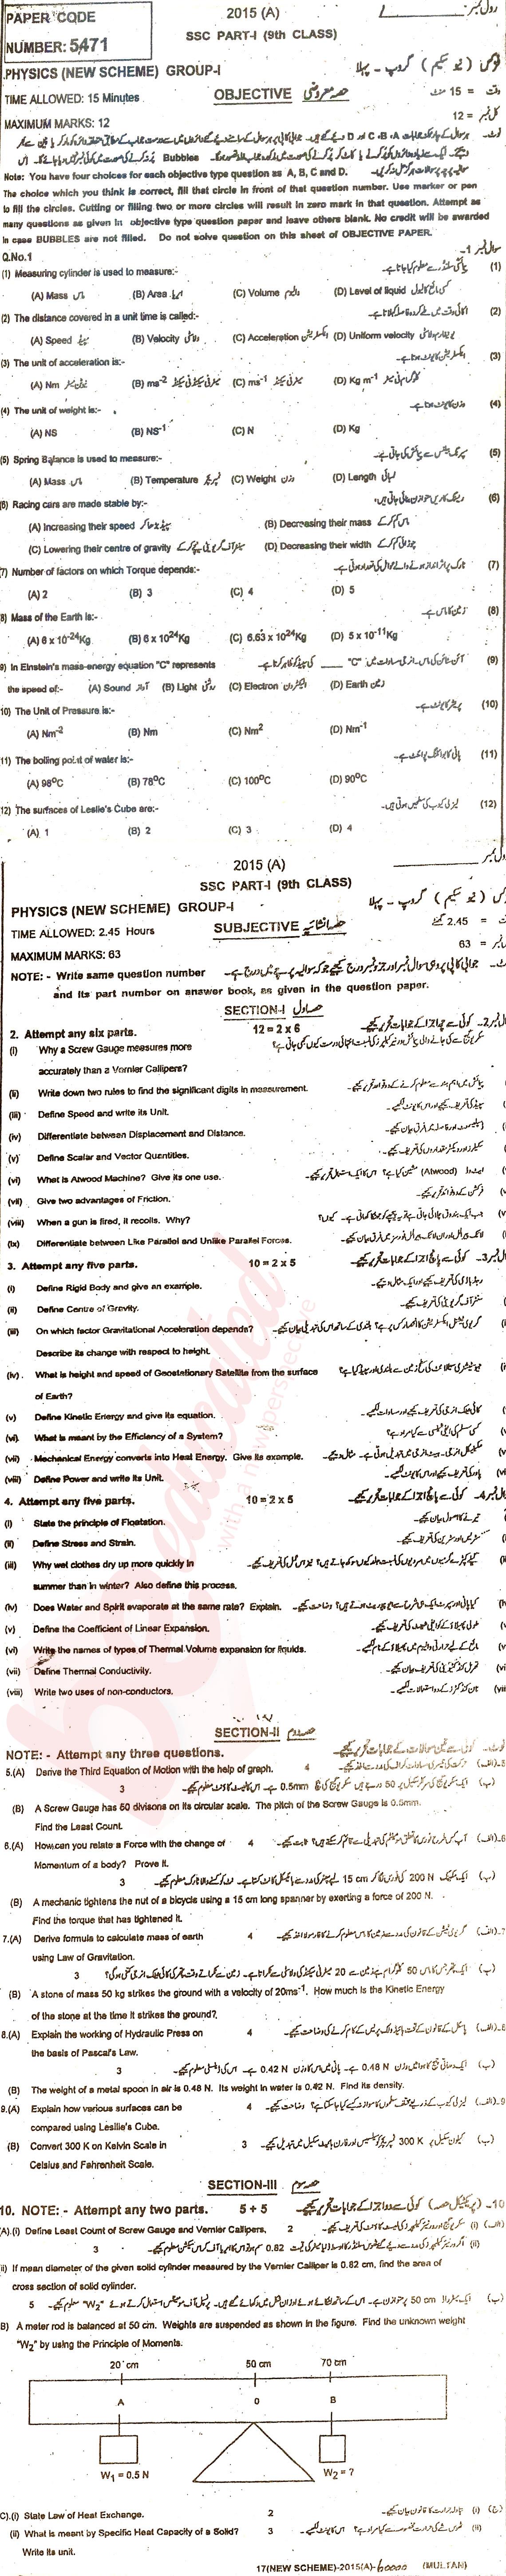 Physics 9th class Past Paper Group 1 BISE Multan 2015